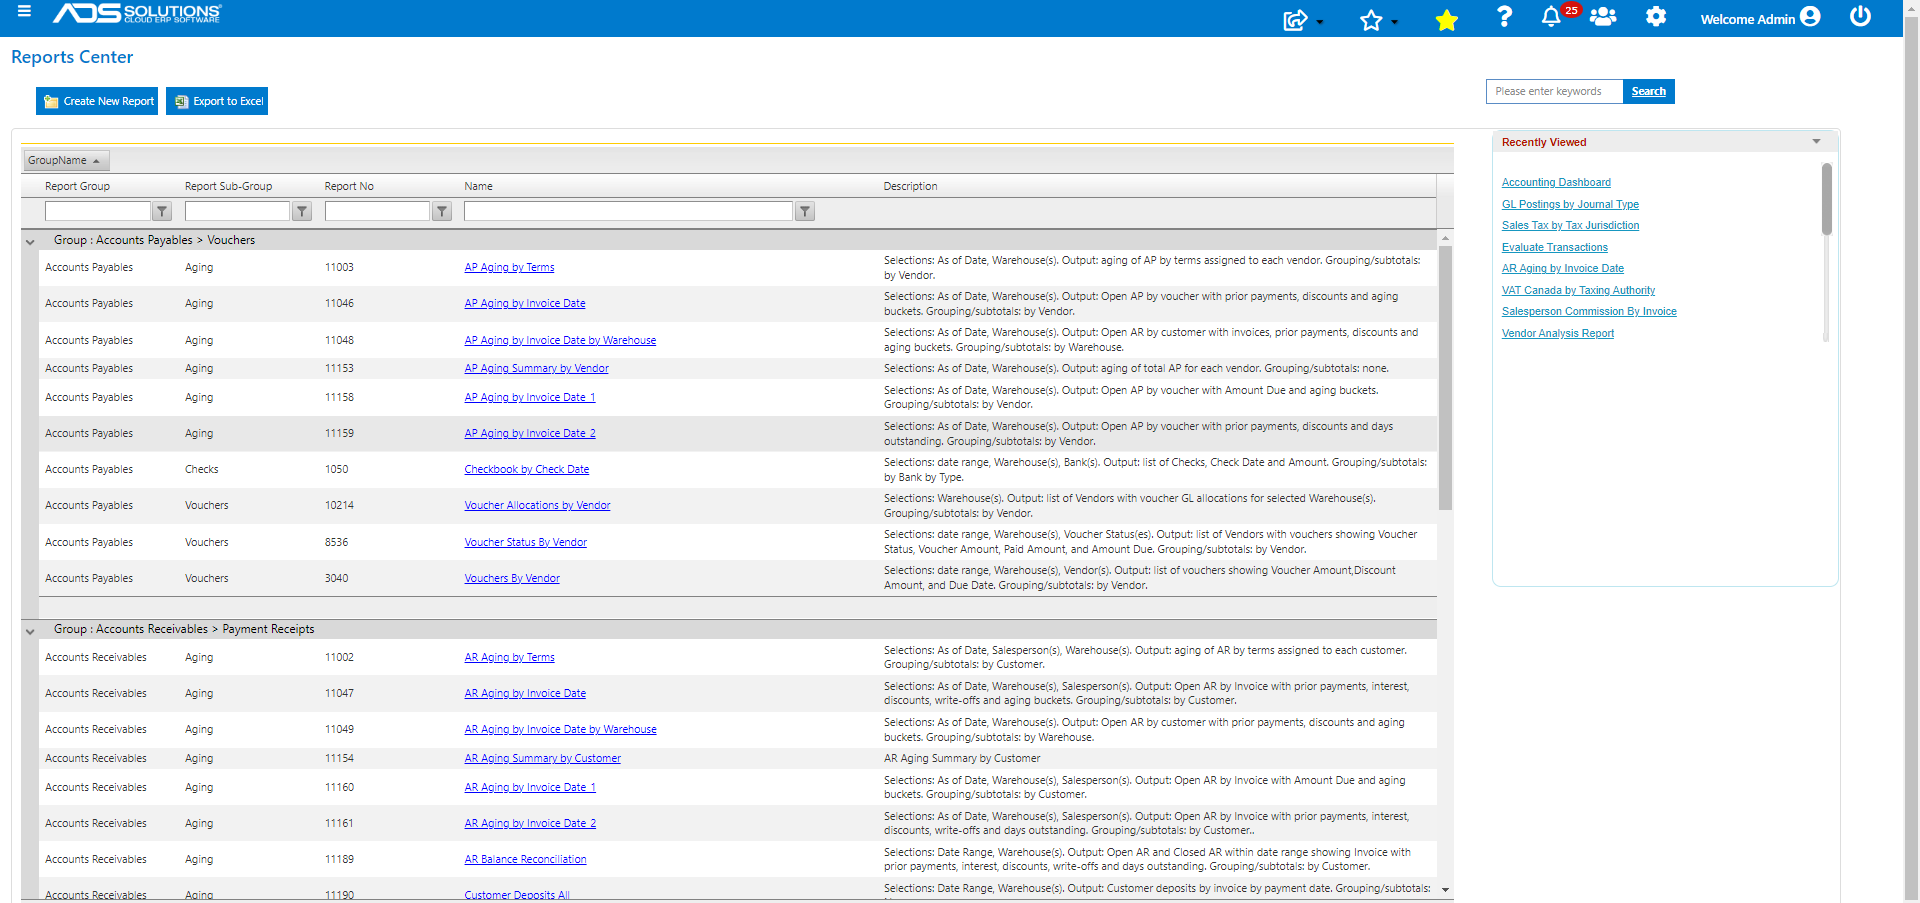 First page of Reports Center showing which includes about 200+ standard reports and many other custom reports